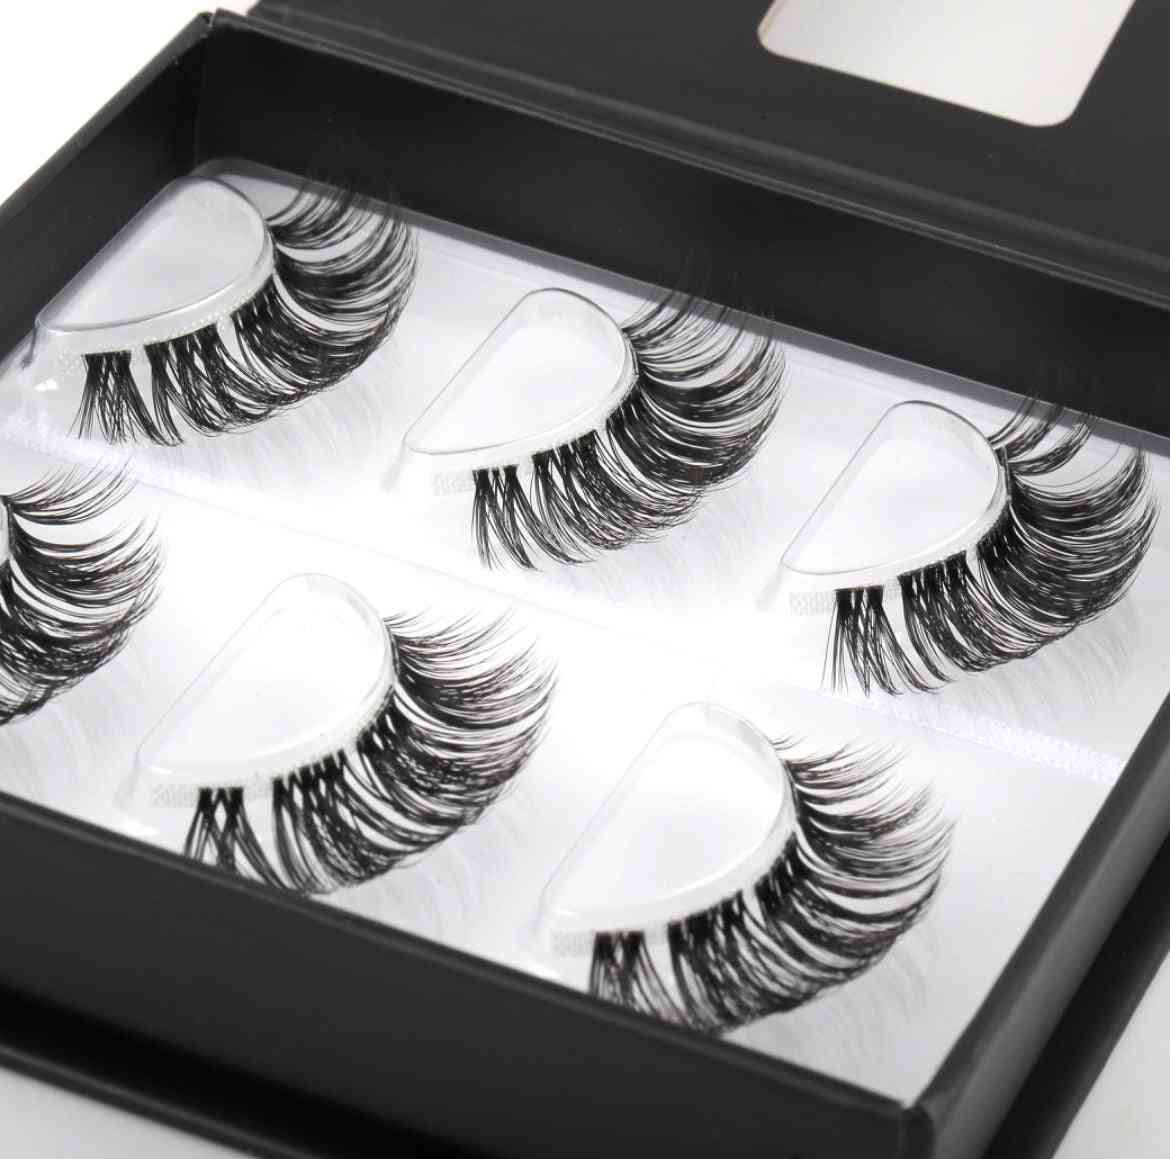 volume lashes | volume eyelash clusters | eyelash extensions at home | volume diy lash extensions |Our DIY Eyelash Extensions bring you at home lash extensions at an affordable price. Our light weight diy lashes are applied underneath your natural lashes to give you beautiful 10 day diy lashes.